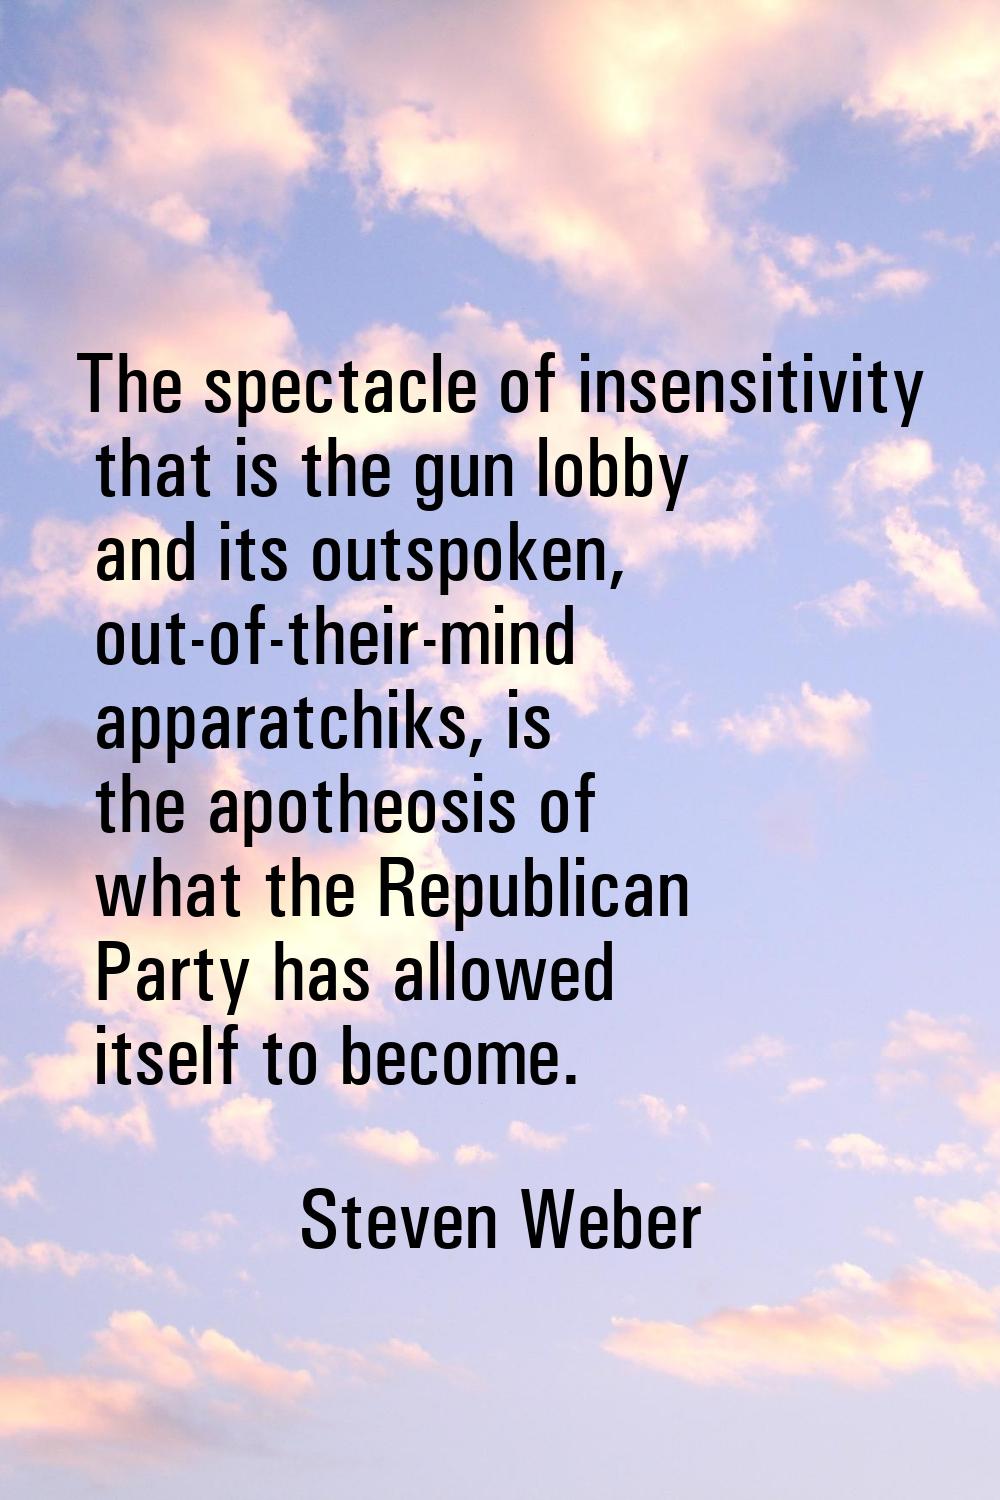 The spectacle of insensitivity that is the gun lobby and its outspoken, out-of-their-mind apparatch